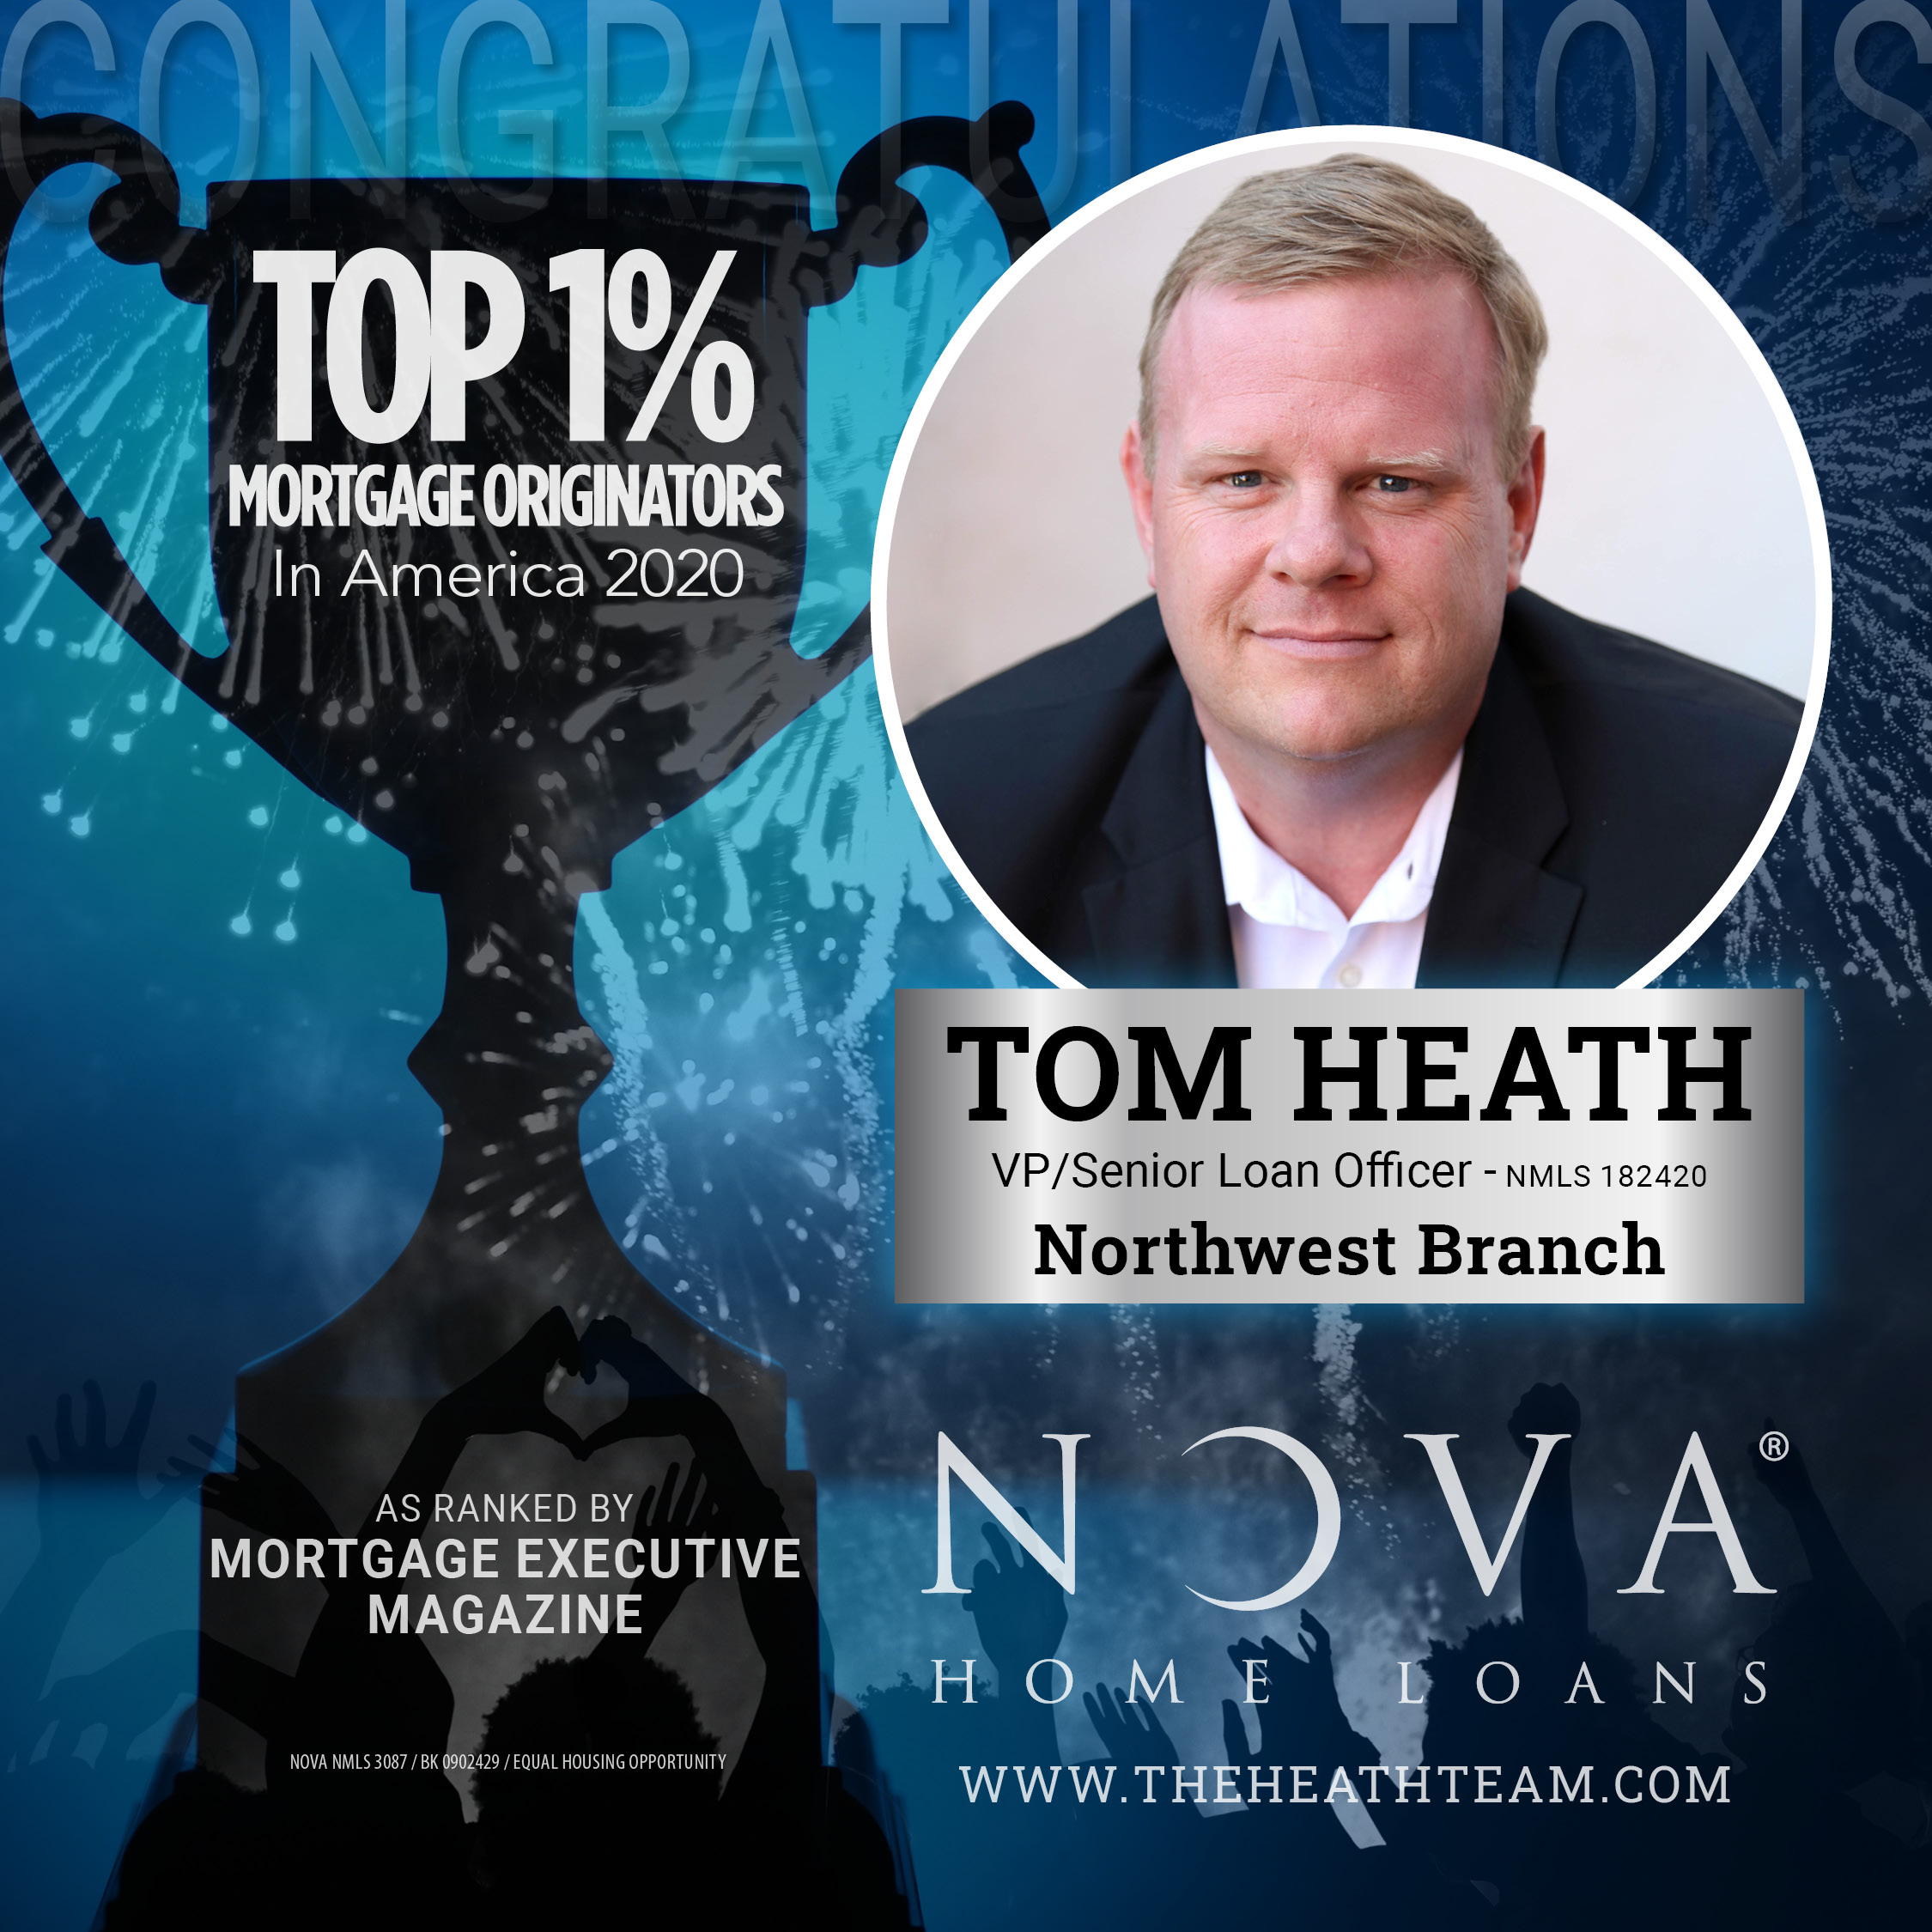 Trust Your Home Loan with the Heath Team - A Top 1% Mortgage Originator